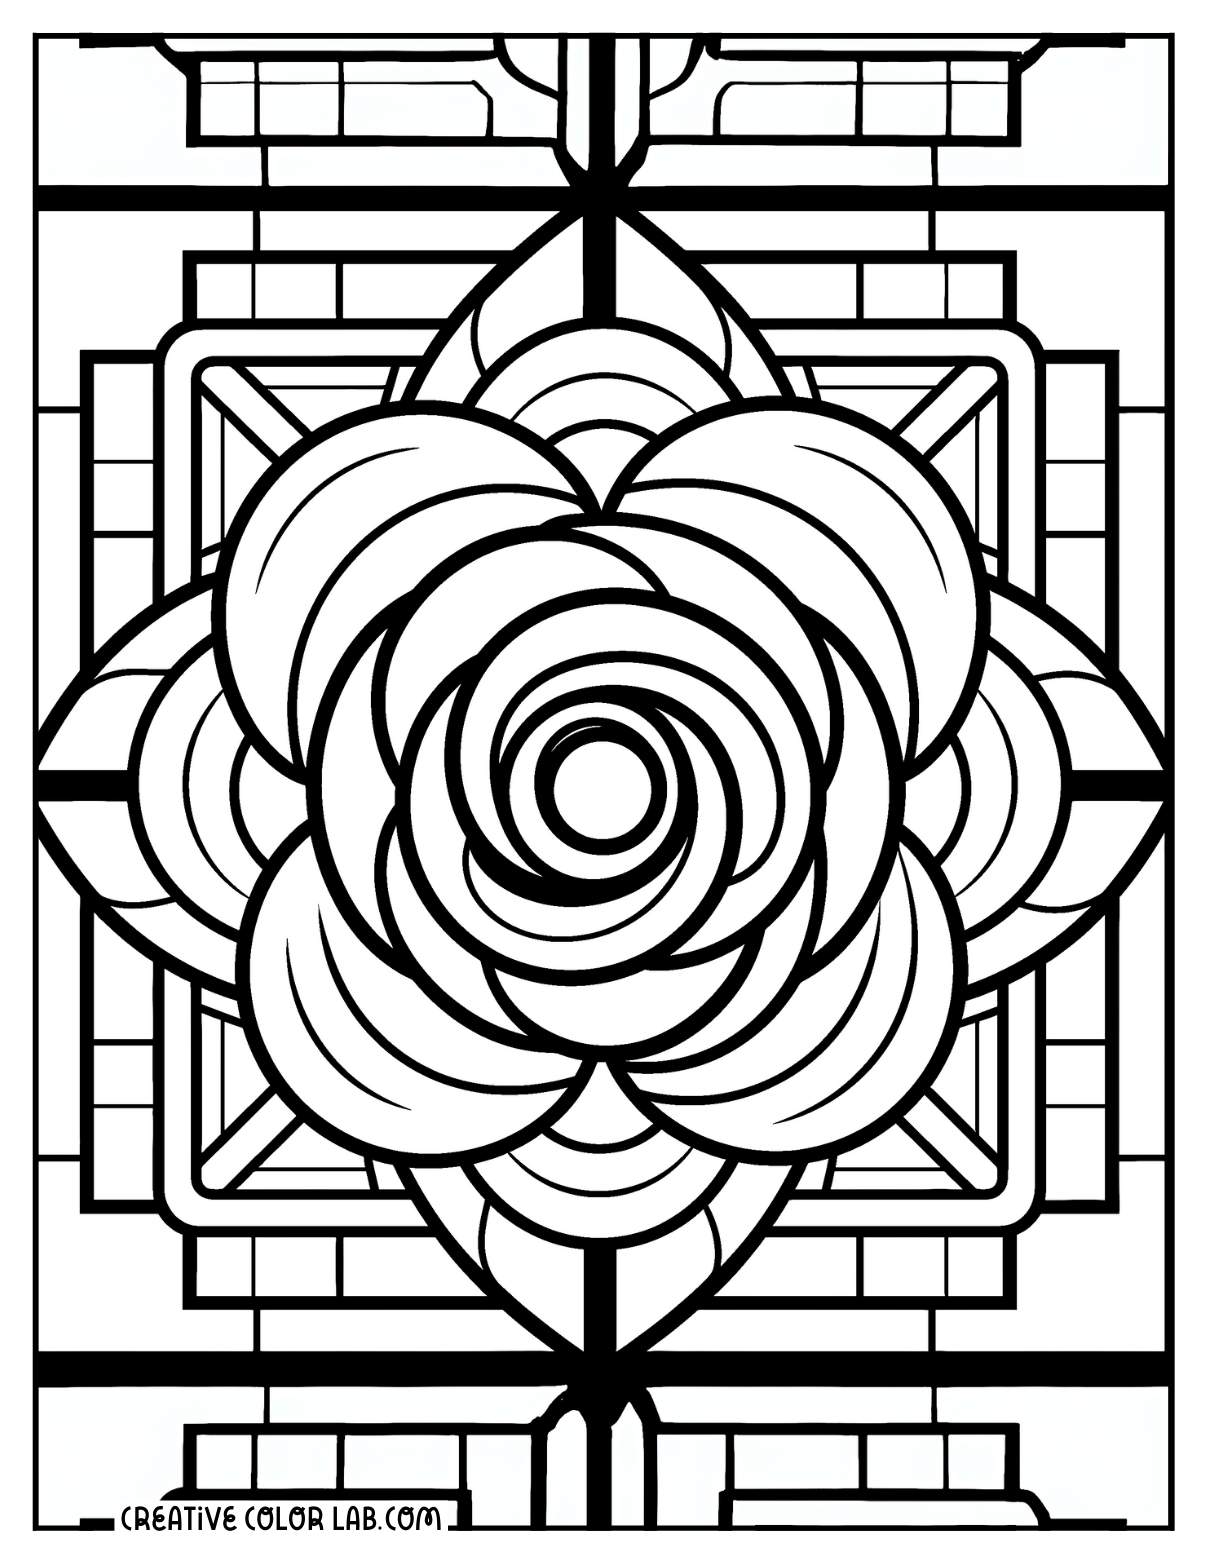 Modern geometric rose coloring page for adults.